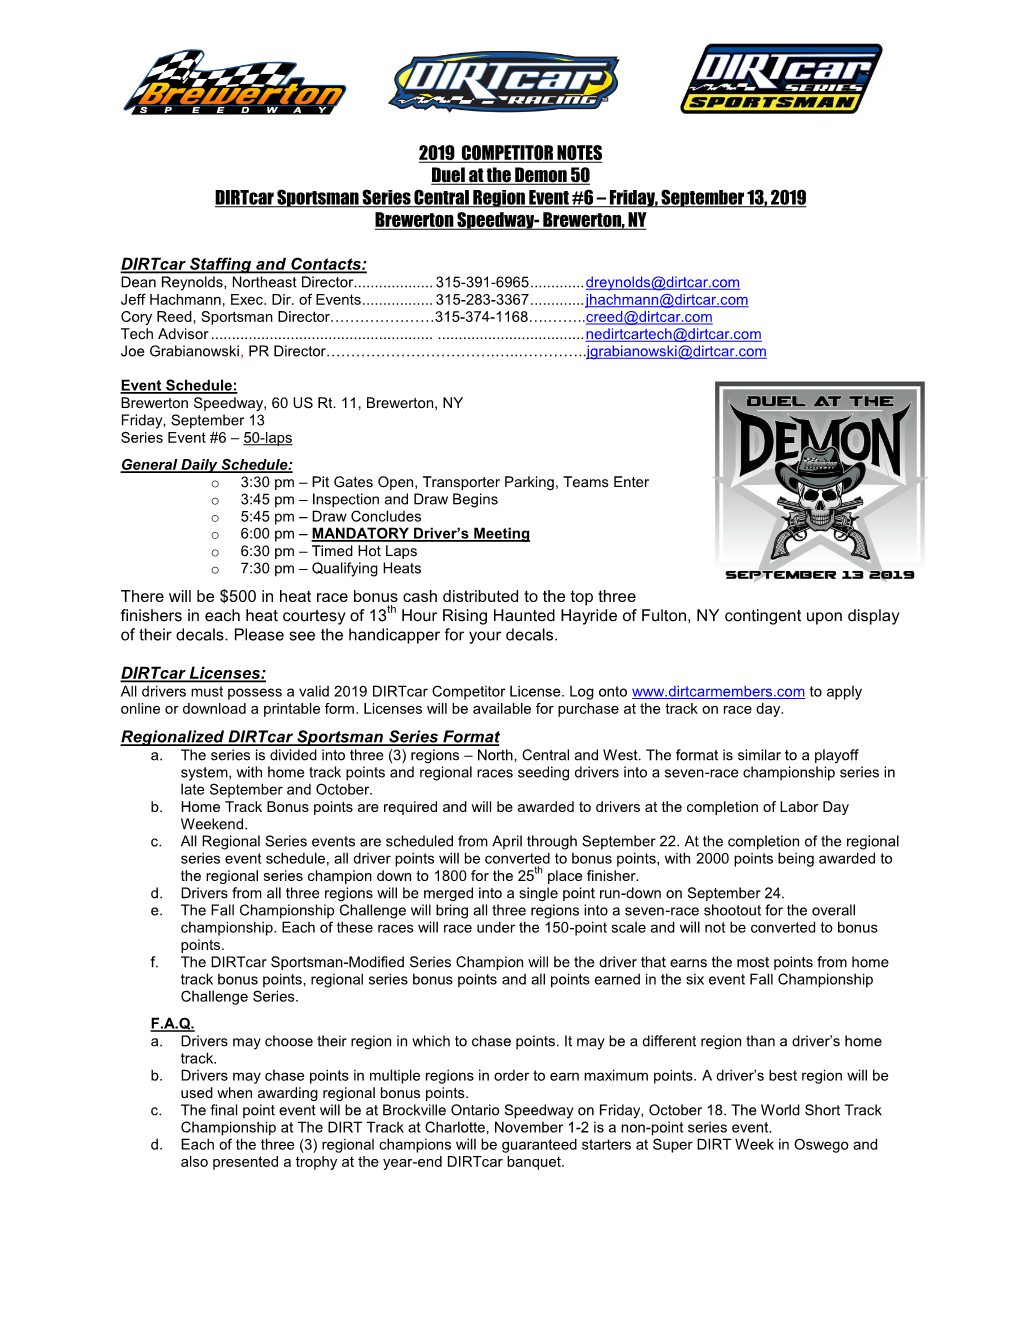 2019 COMPETITOR NOTES Duel at the Demon 50 Dirtcar Sportsman Series Central Region Event #6 – Friday, September 13, 2019 Brewerton Speedway- Brewerton, NY